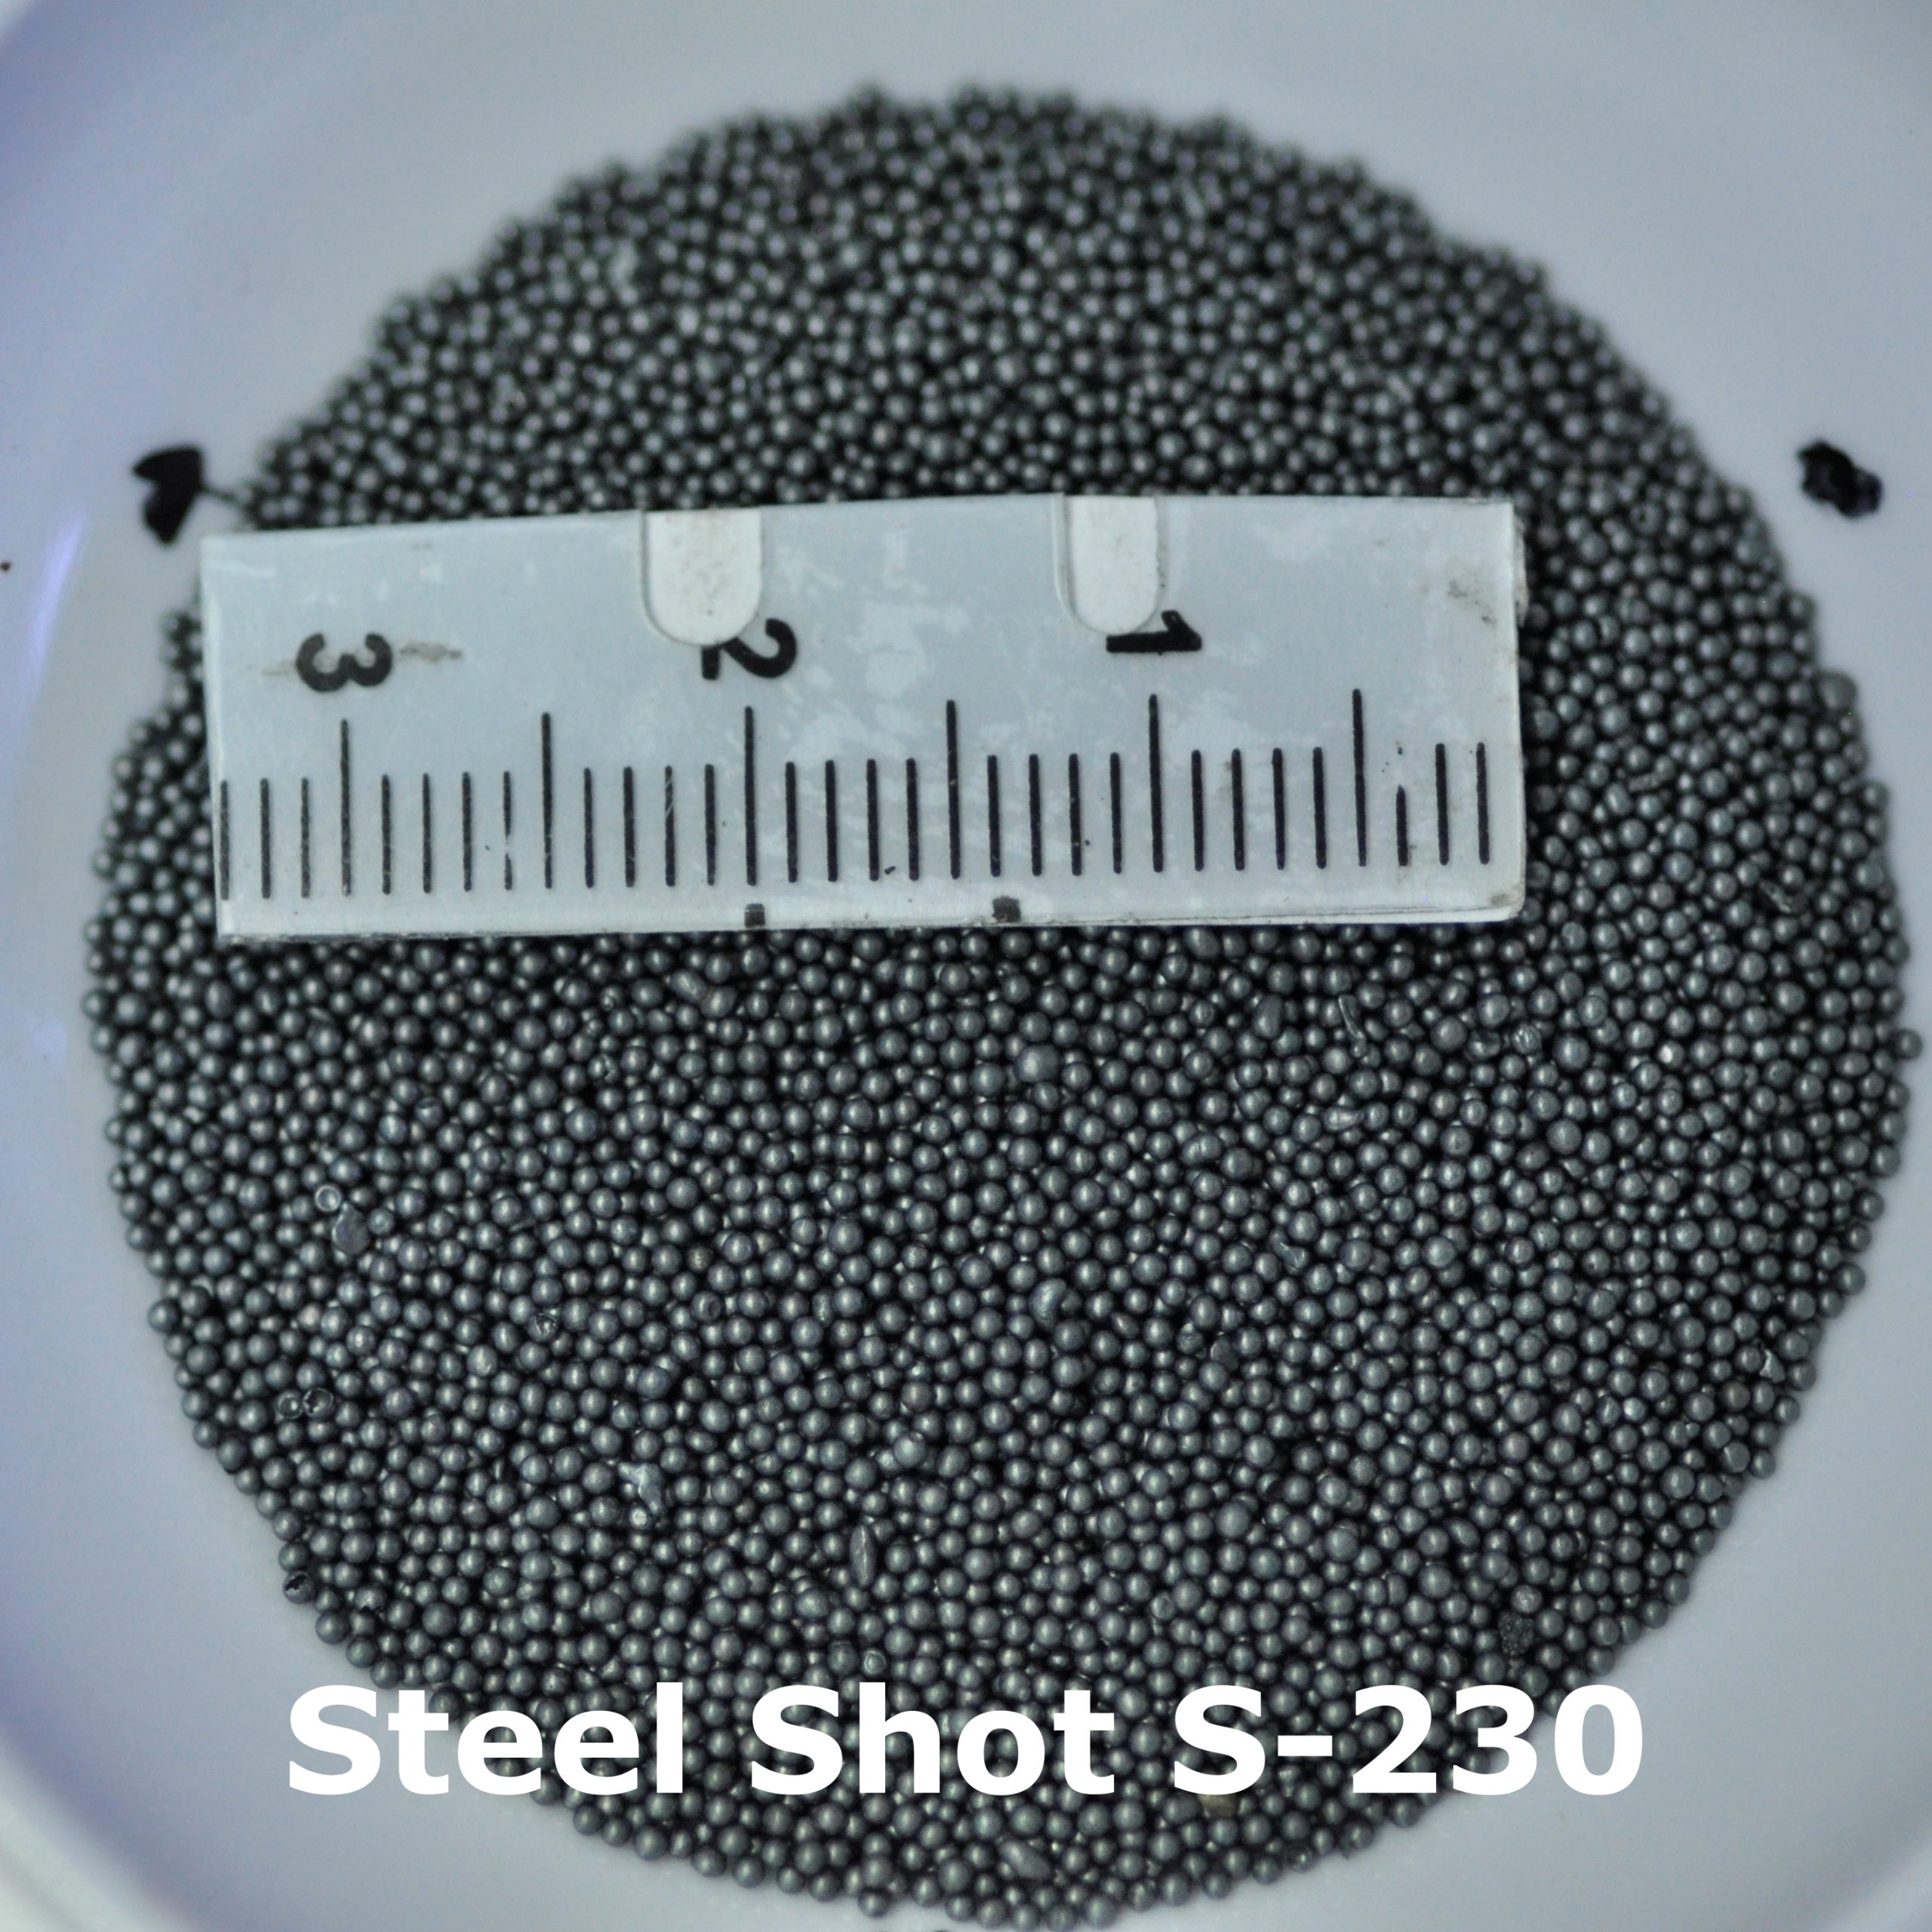 S-230/SH-70
Size 0.70mm